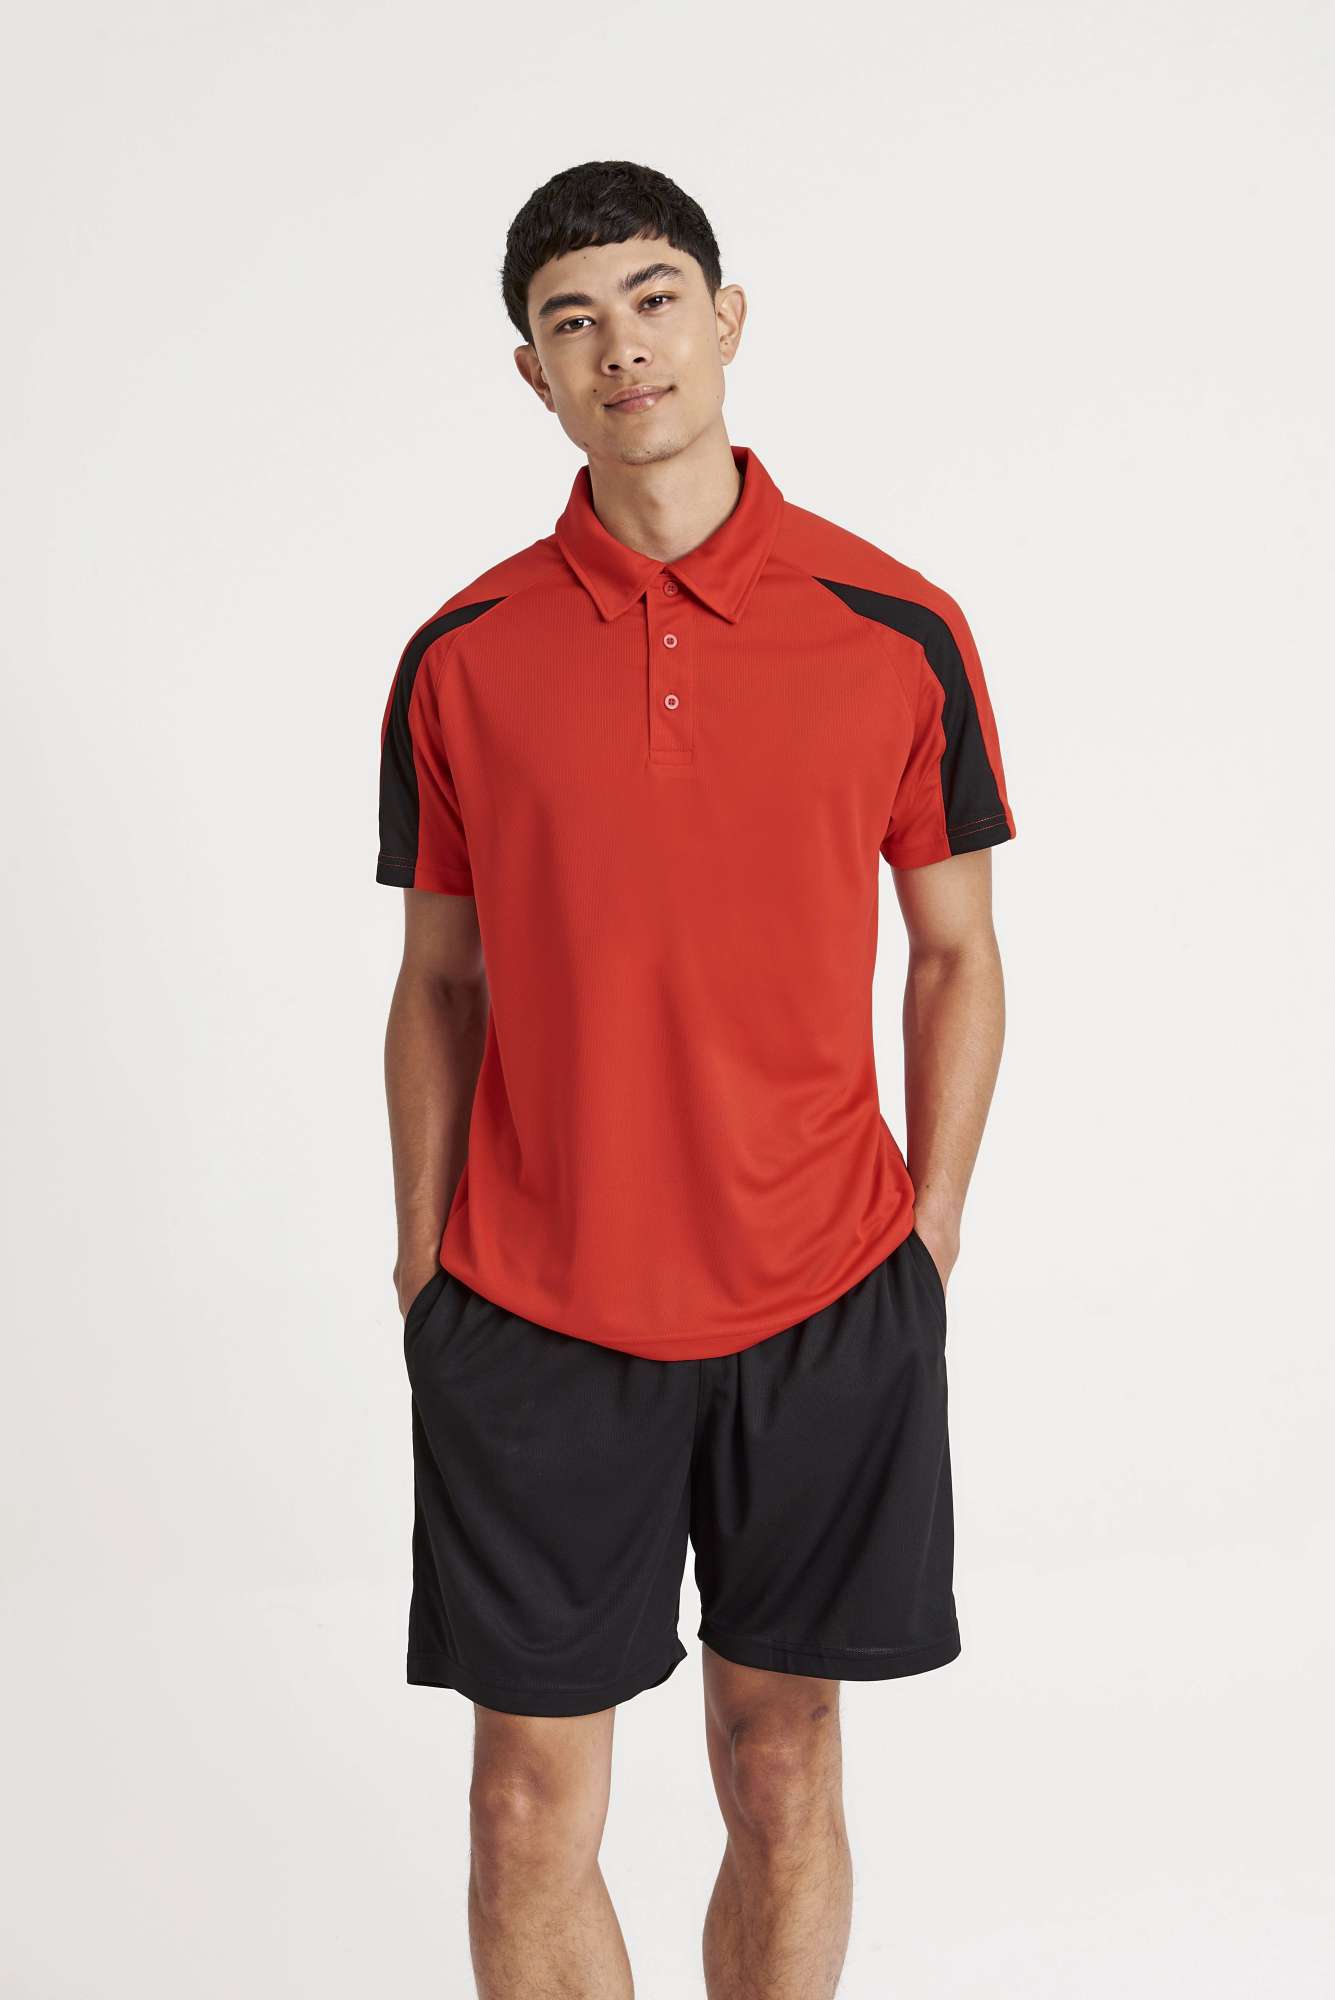 Just Cool Contrast Cool Polo Arctic White/Fire Red XL (JC043)